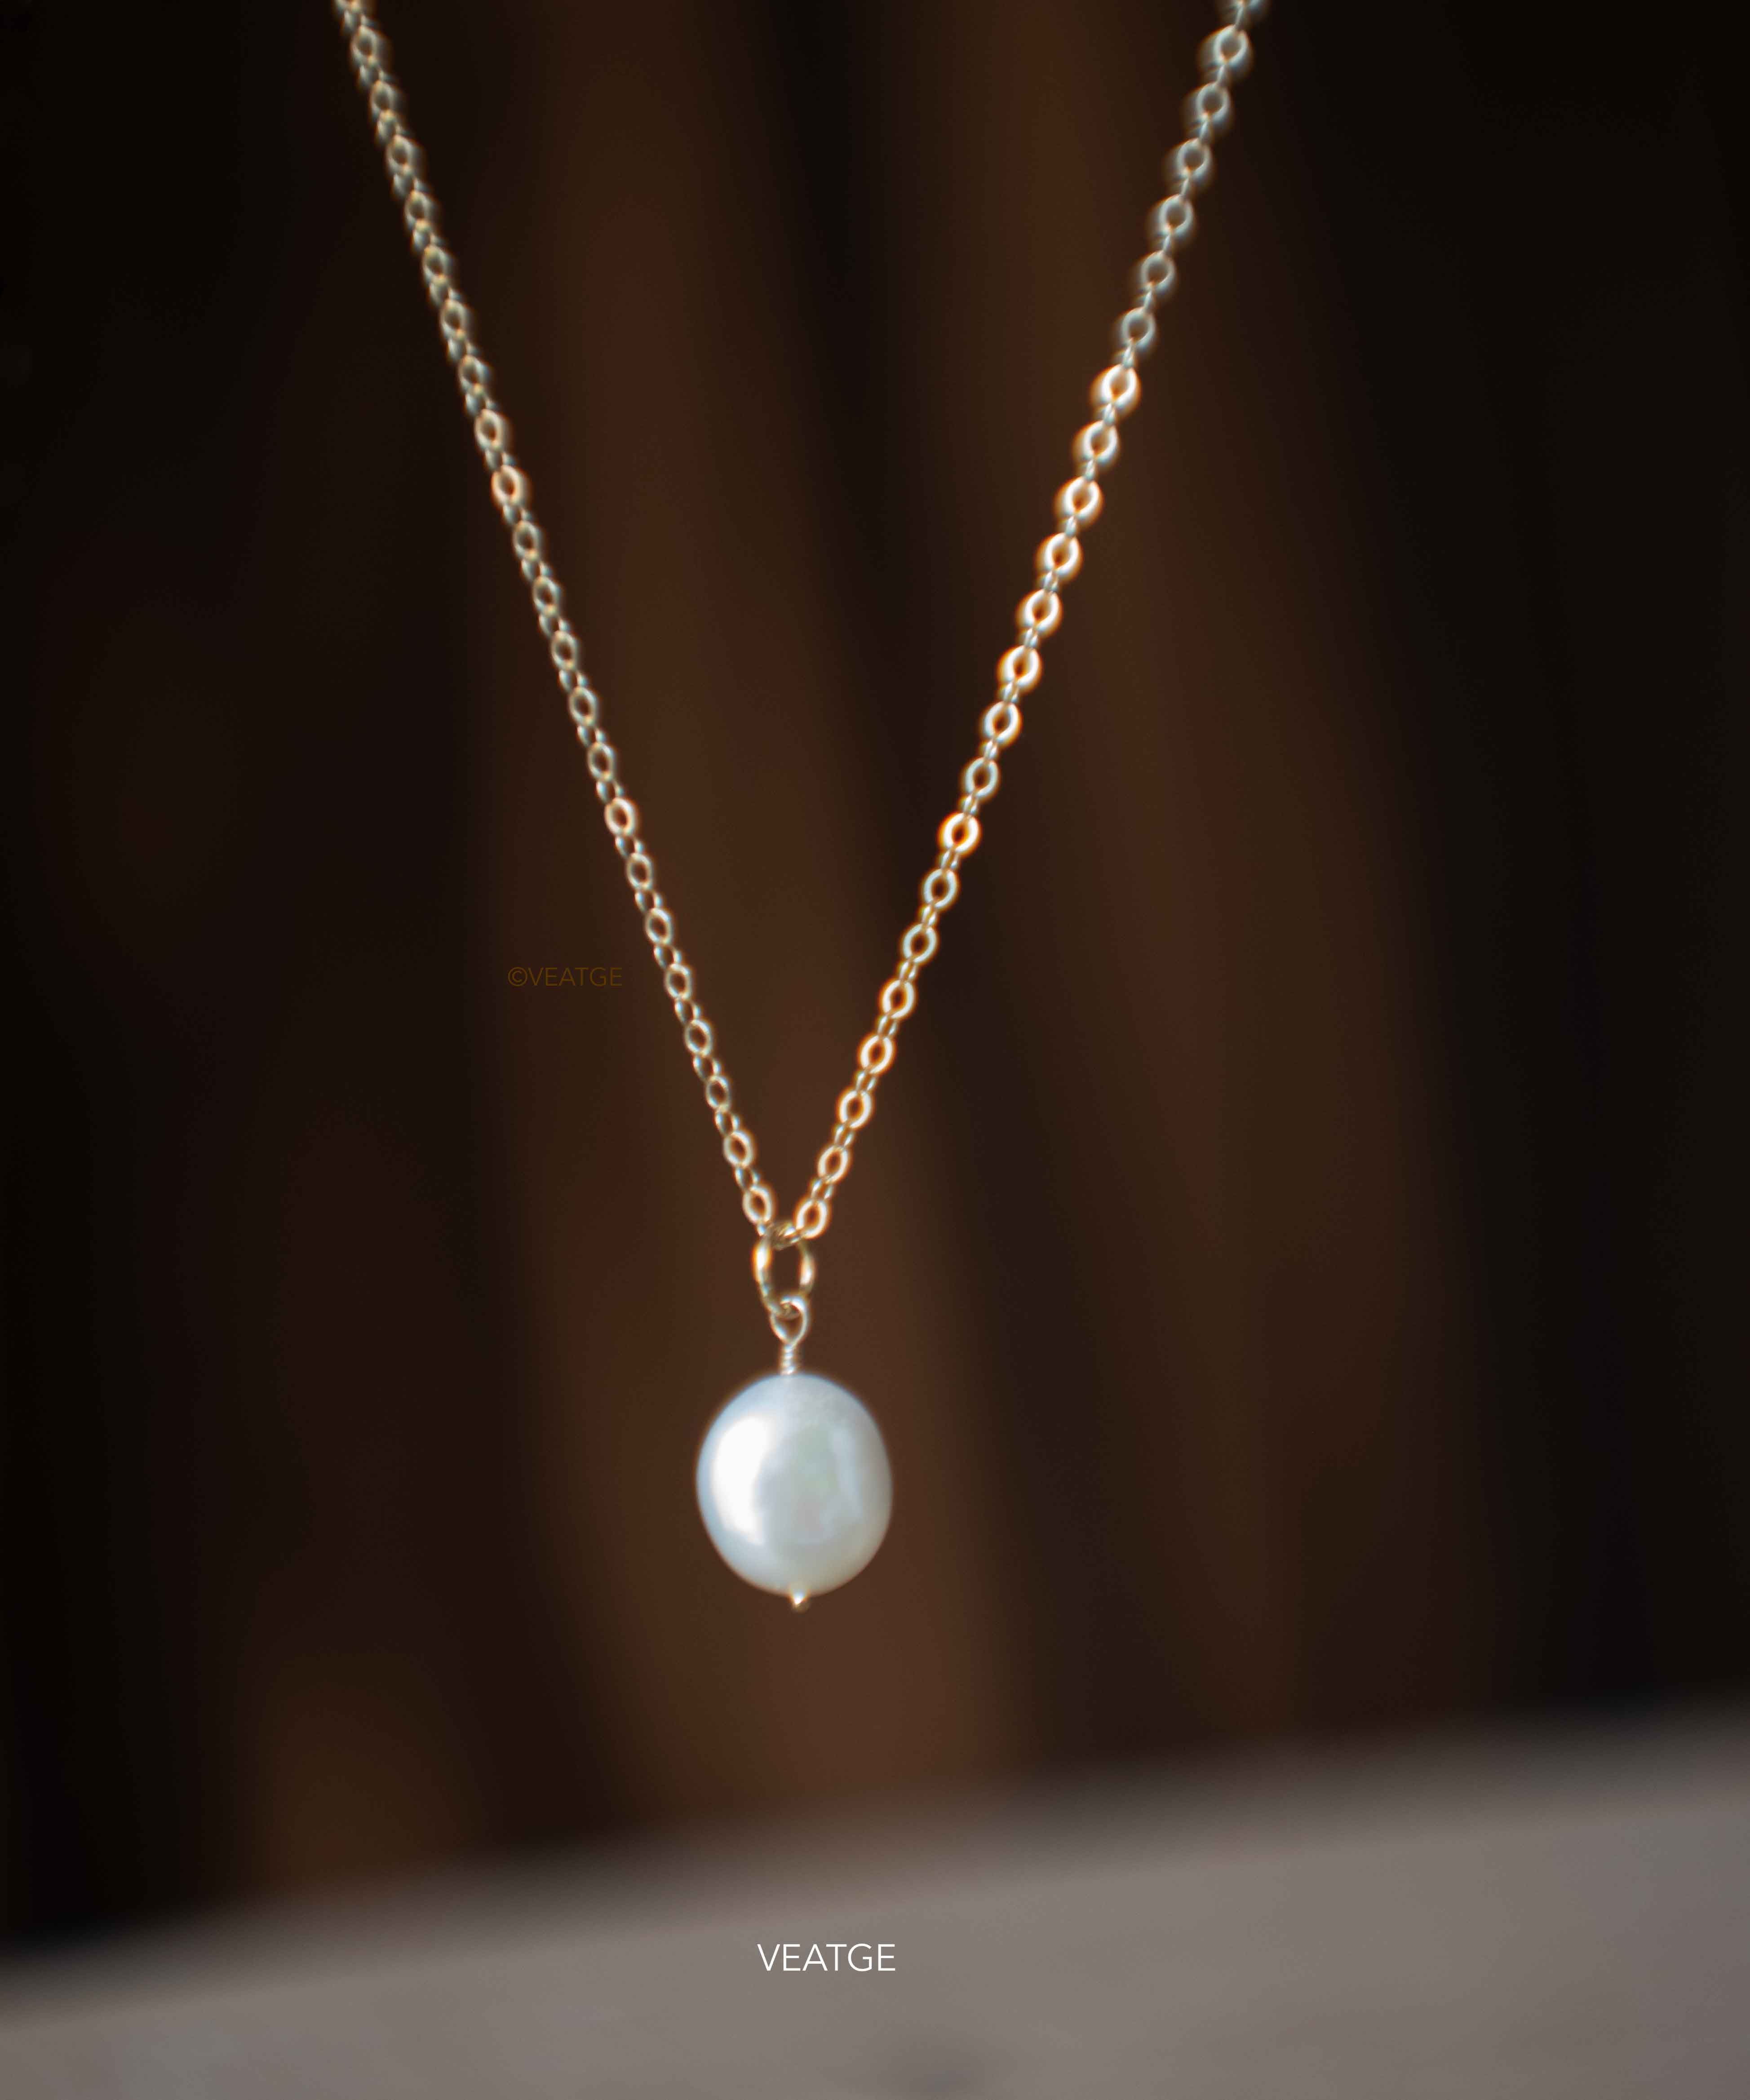 Genuine Coin Pearl Necklace Gold, Flat Pearl Necklace, Large Single Pearl Necklace, Round Pearl Pendant Necklace, Wedding Jewelry, Wedding gift for Women